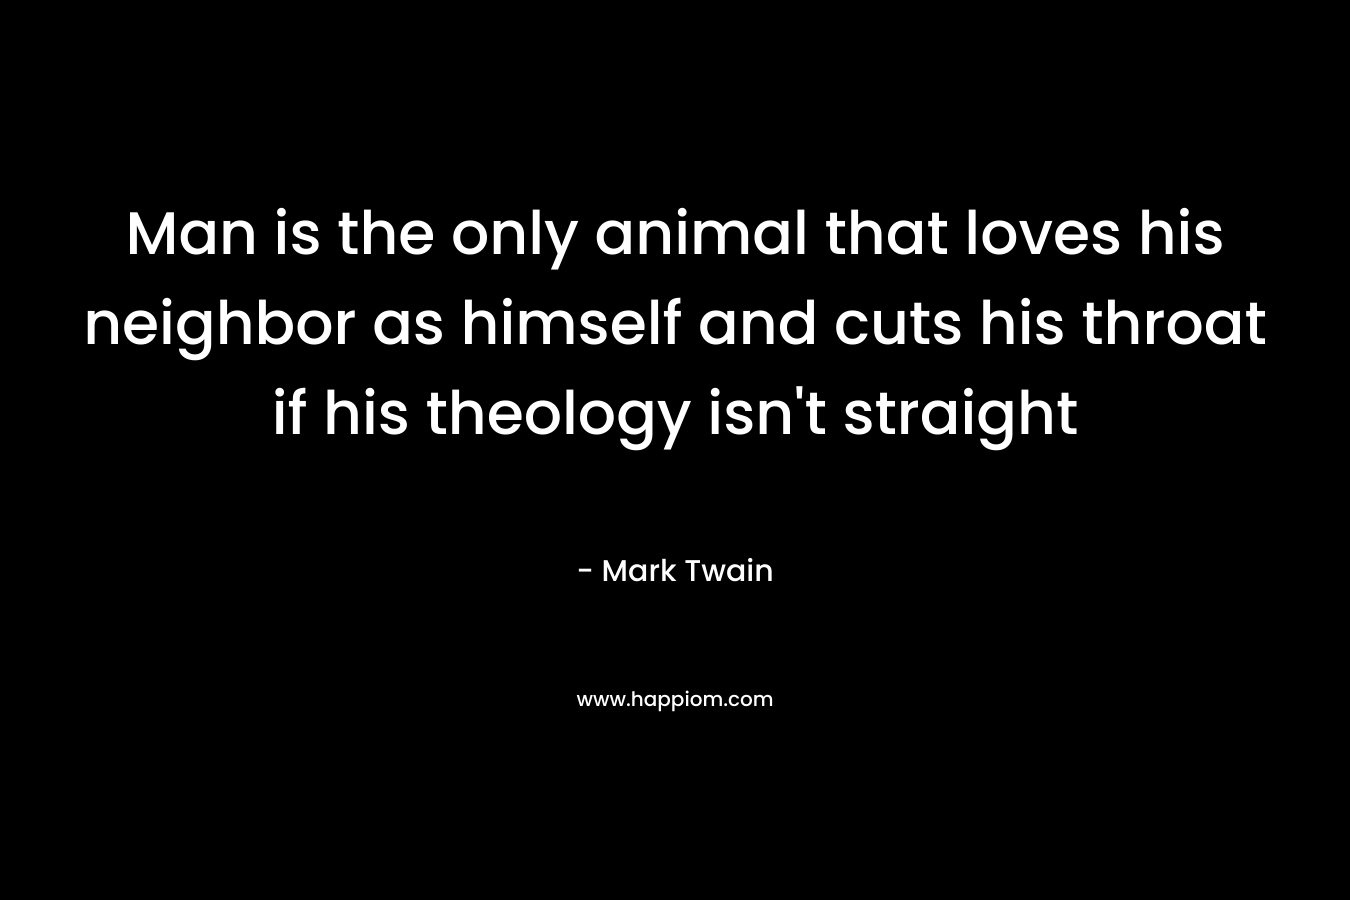 Man is the only animal that loves his neighbor as himself and cuts his throat if his theology isn't straight